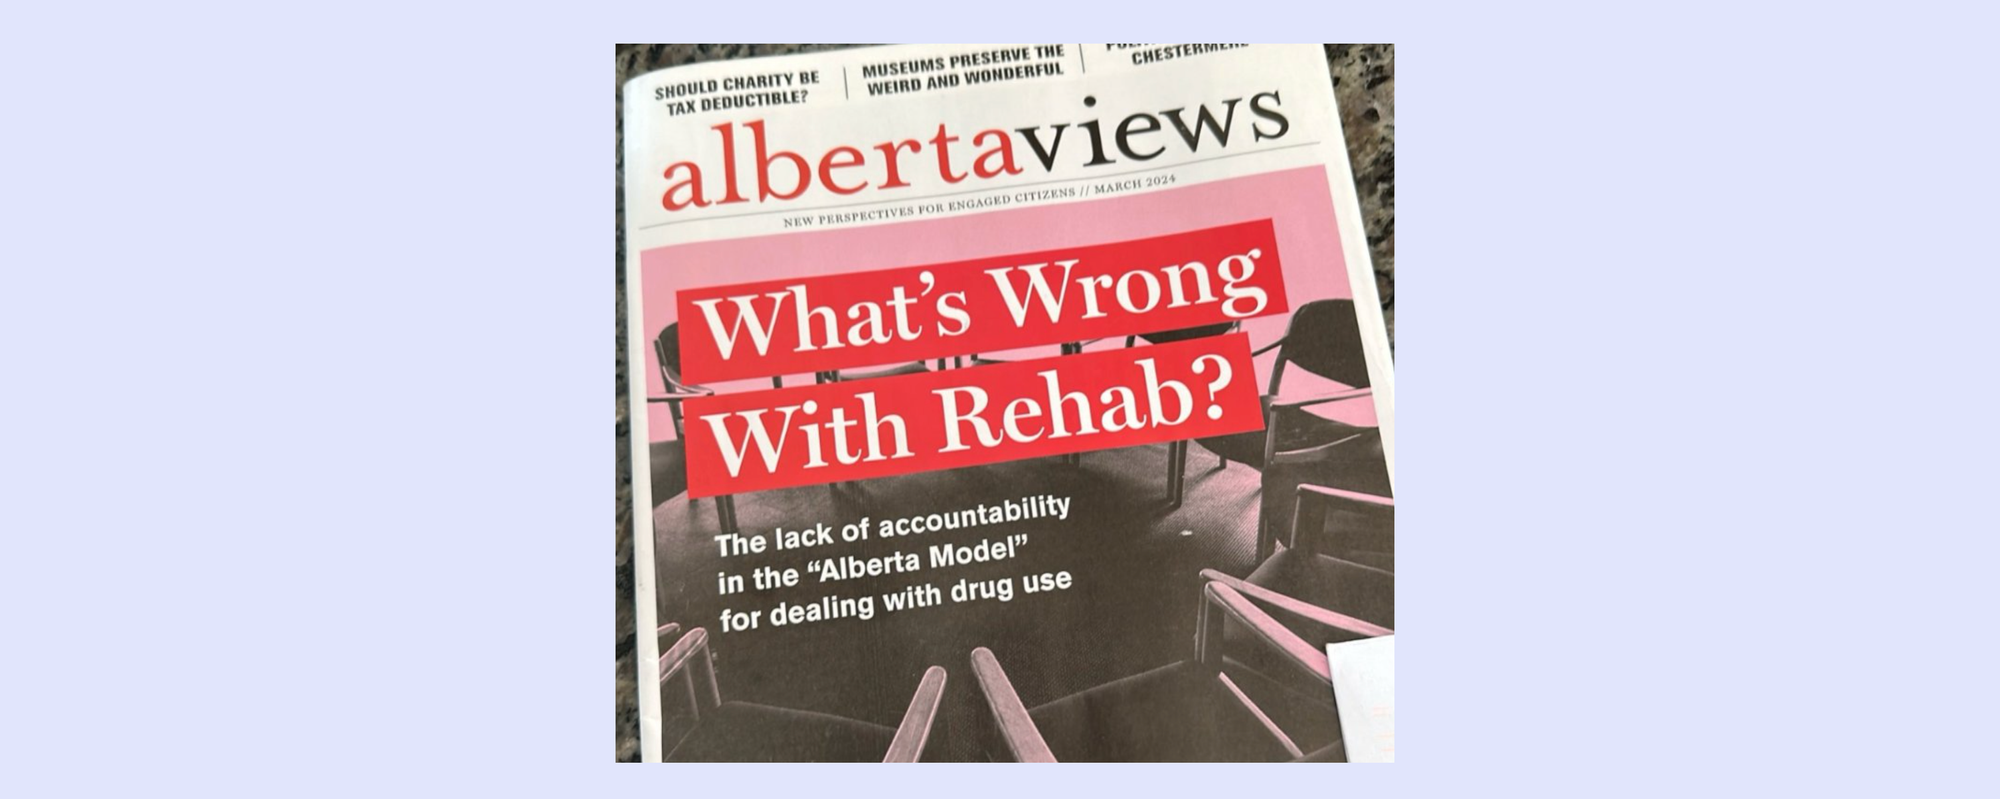 Alberta Views cover story: What's Wrong With Rehab? in white, pink and red, overlaid on a black and white photo of a ring of empty chairs.